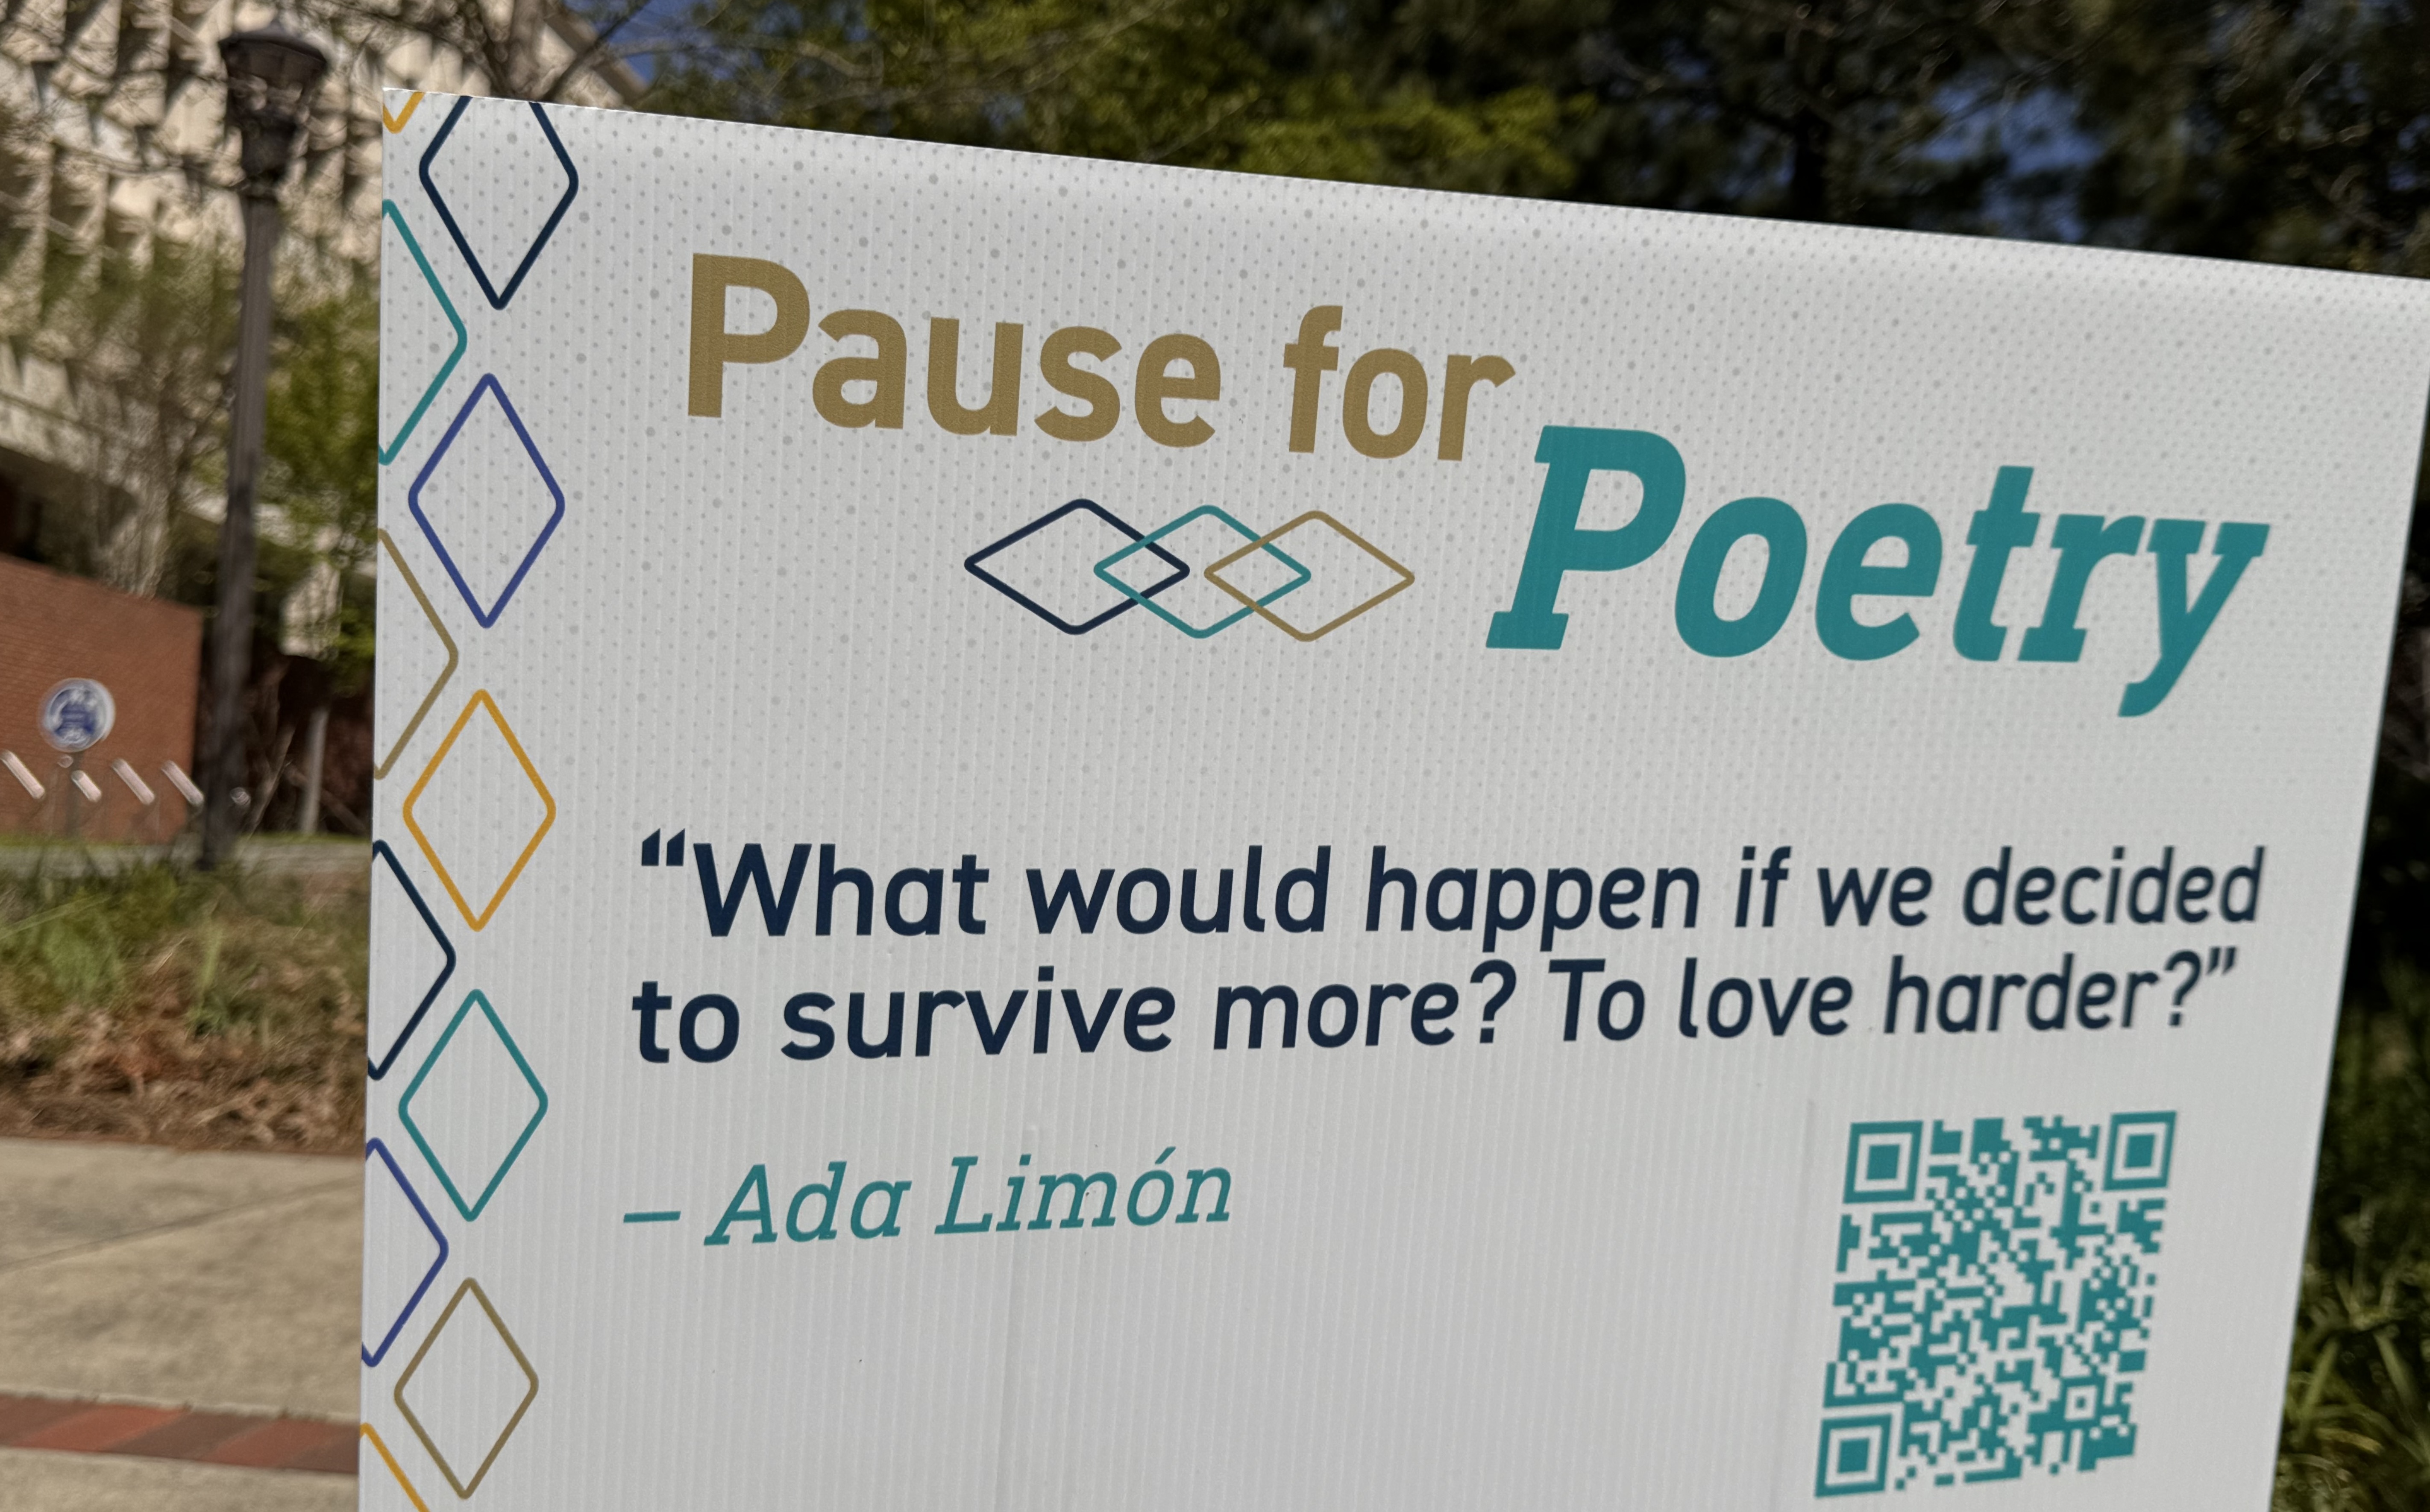 a "pause for poetry" sign on Georgia Tech's campus that reads "What would happen if we decided to survive more? To love harder?" - Ada Limón